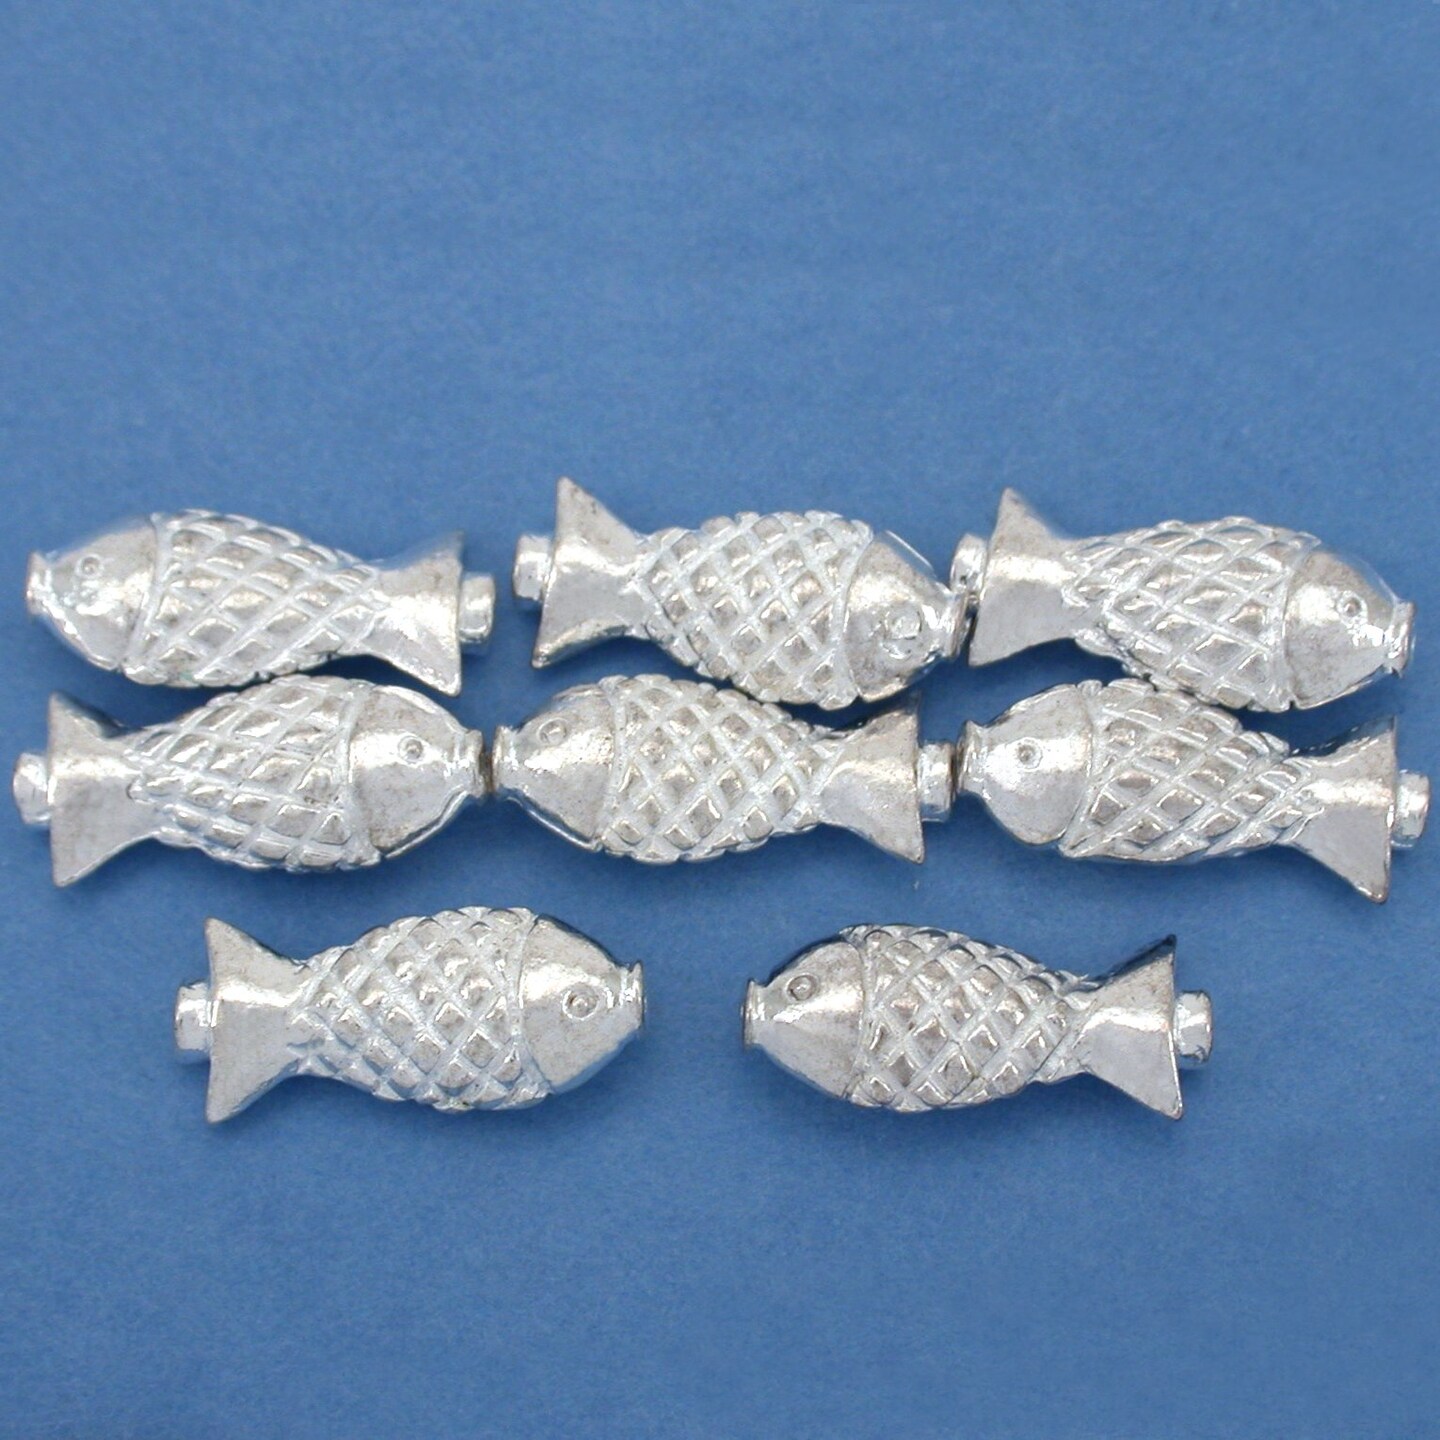 Fish Beads Silver Plated Spacer 18mm 15 Grams Approx 8